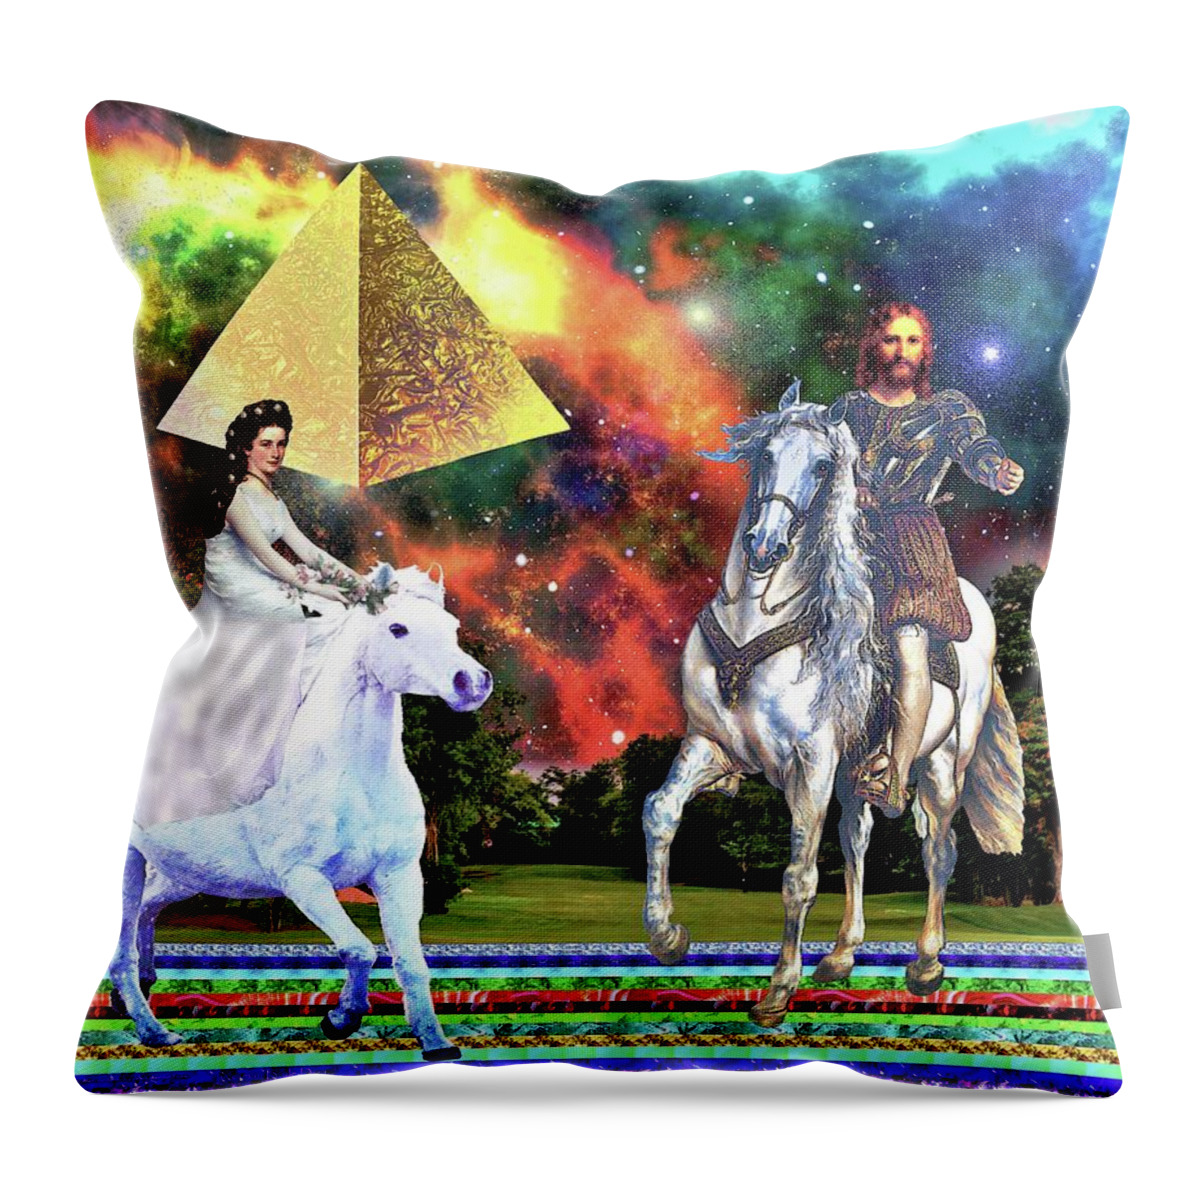 Jesus Throw Pillow featuring the digital art On Earth as it is in Heaven by Norman Brule